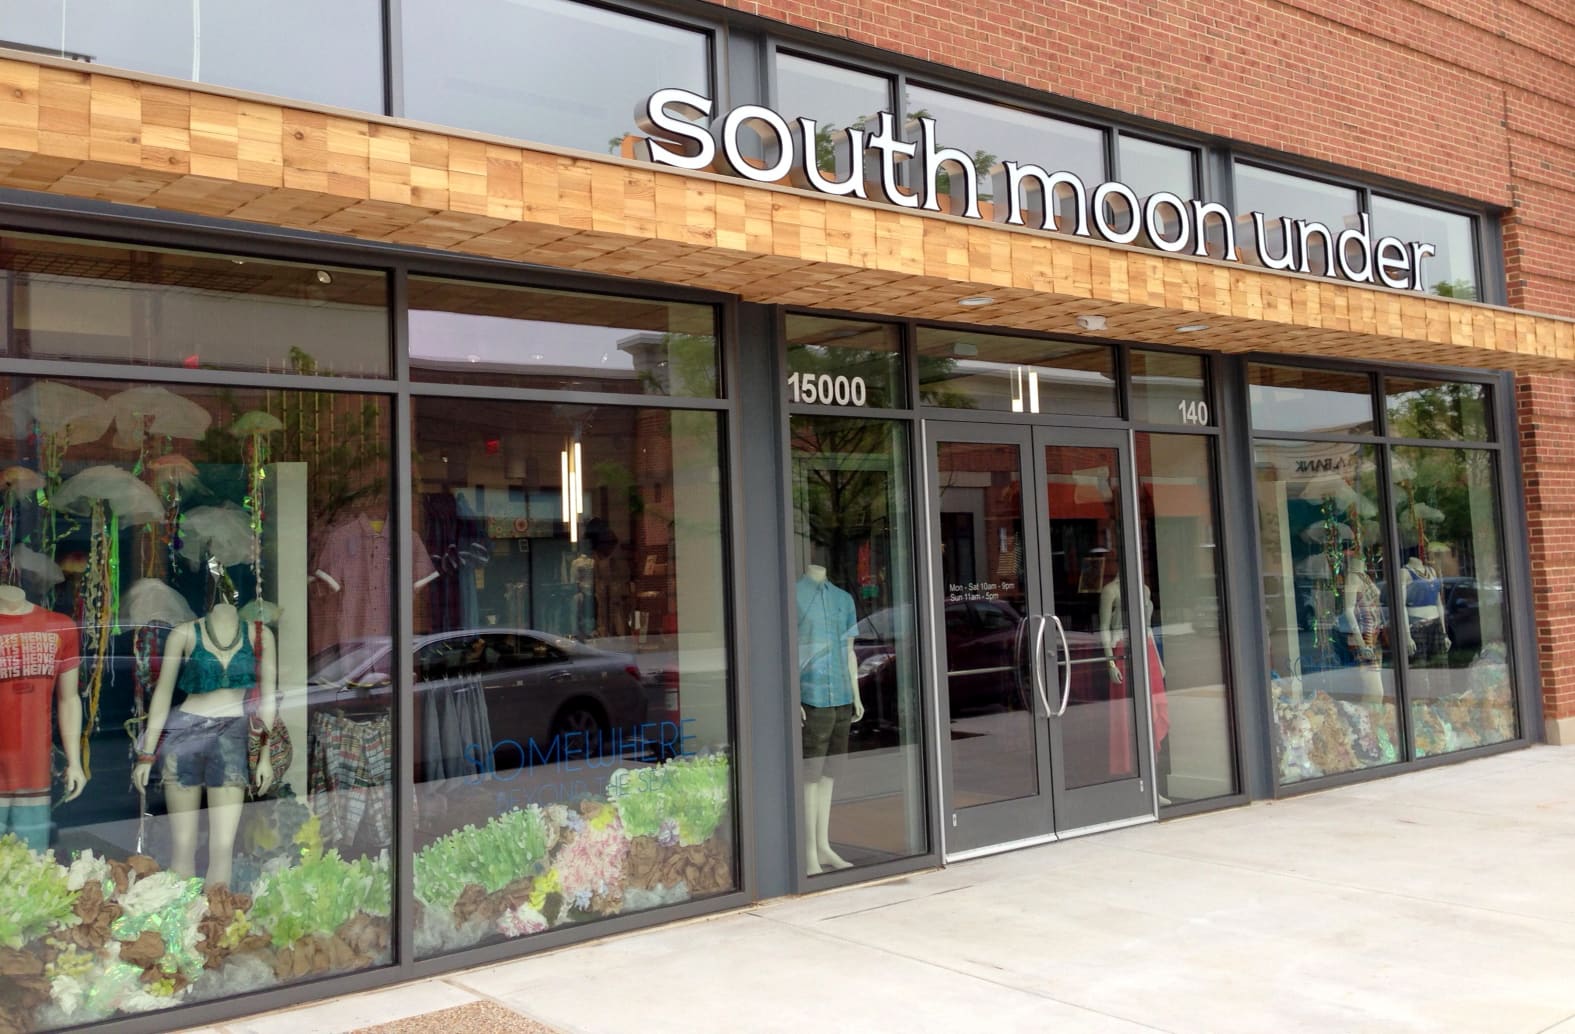 South Moon Under Planning First Georgia Store For Ponce City Market - What  Now Atlanta: The Best Source for Atlanta News